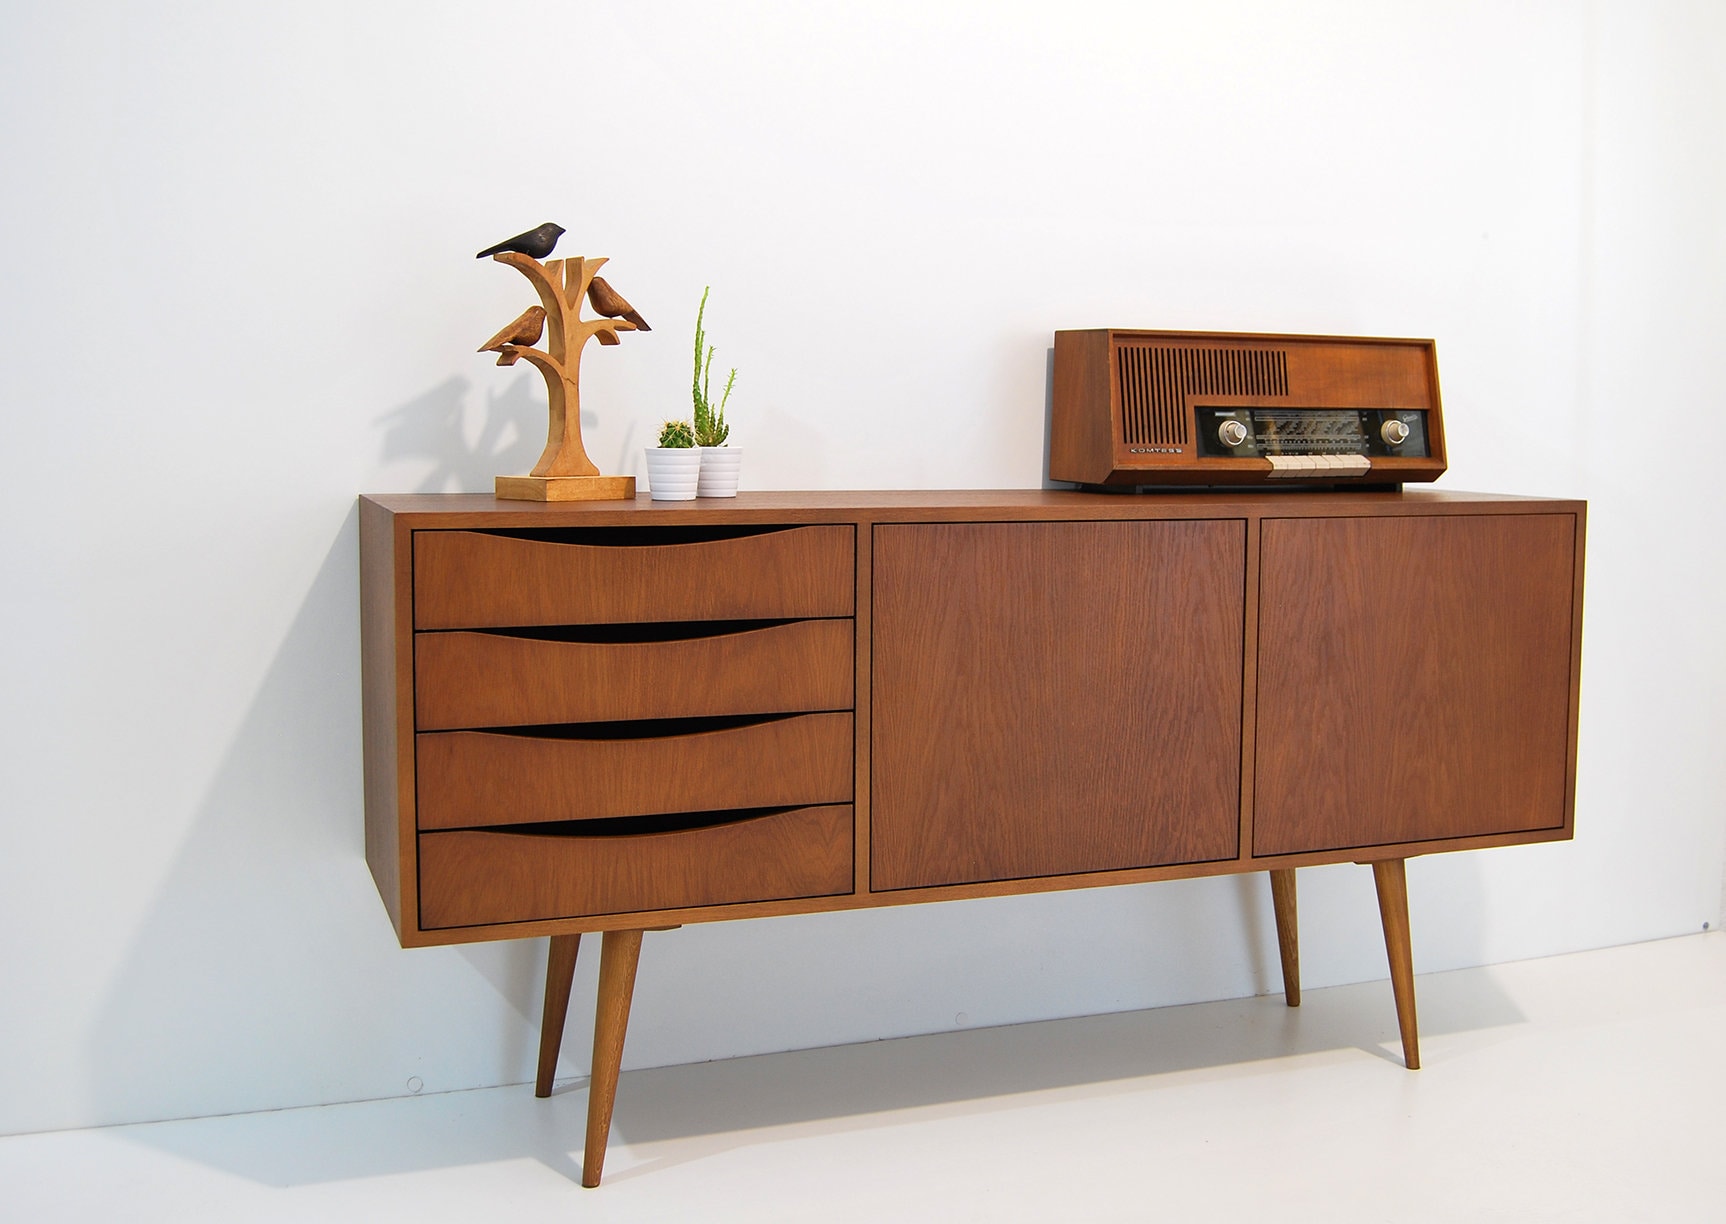 Unit LP Scandinavian Drawers / Vinyl Console Room Storage Modern Etsy / Living Furniture Record / Sideboard - Mid-century / With